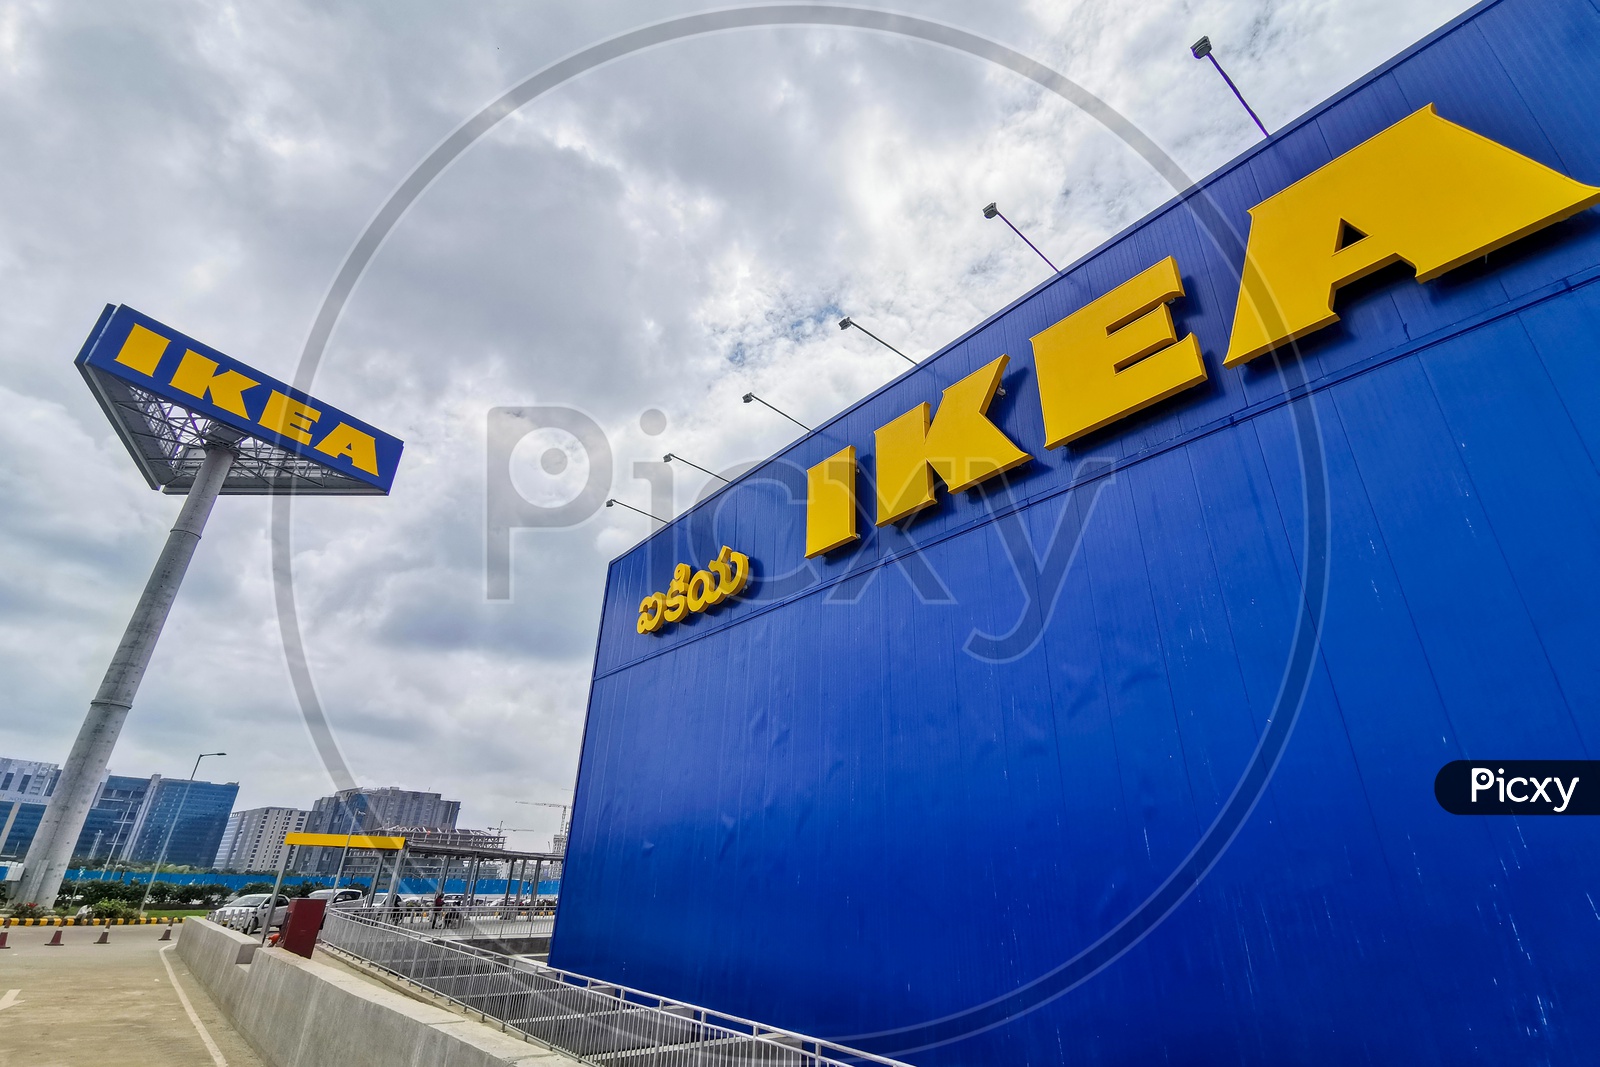 IKEA Home Furnishing Store With Name Board On Store Building